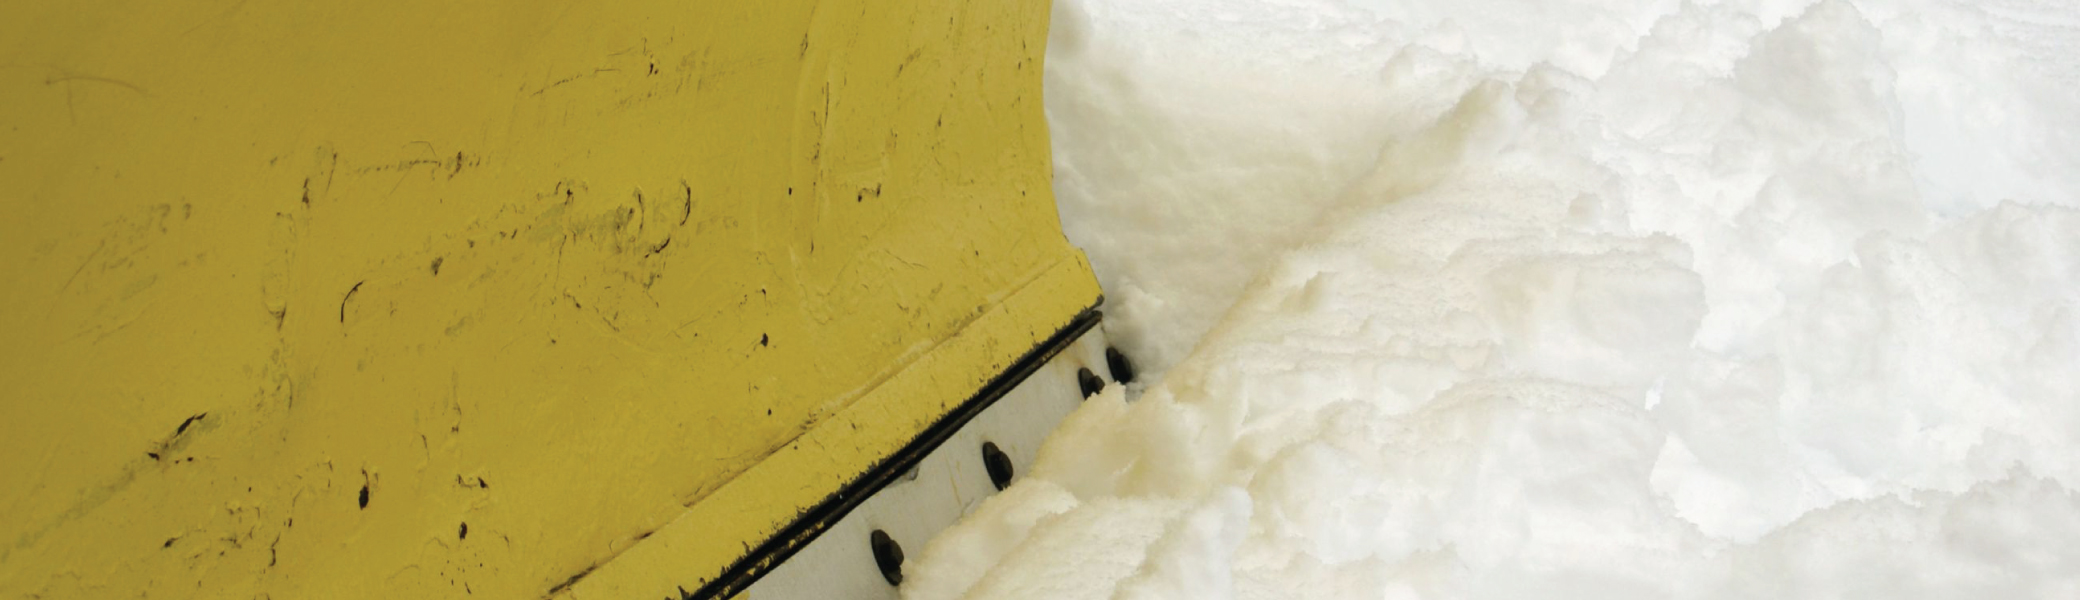 Snow Removal Services - Midwest Lawn and Snow